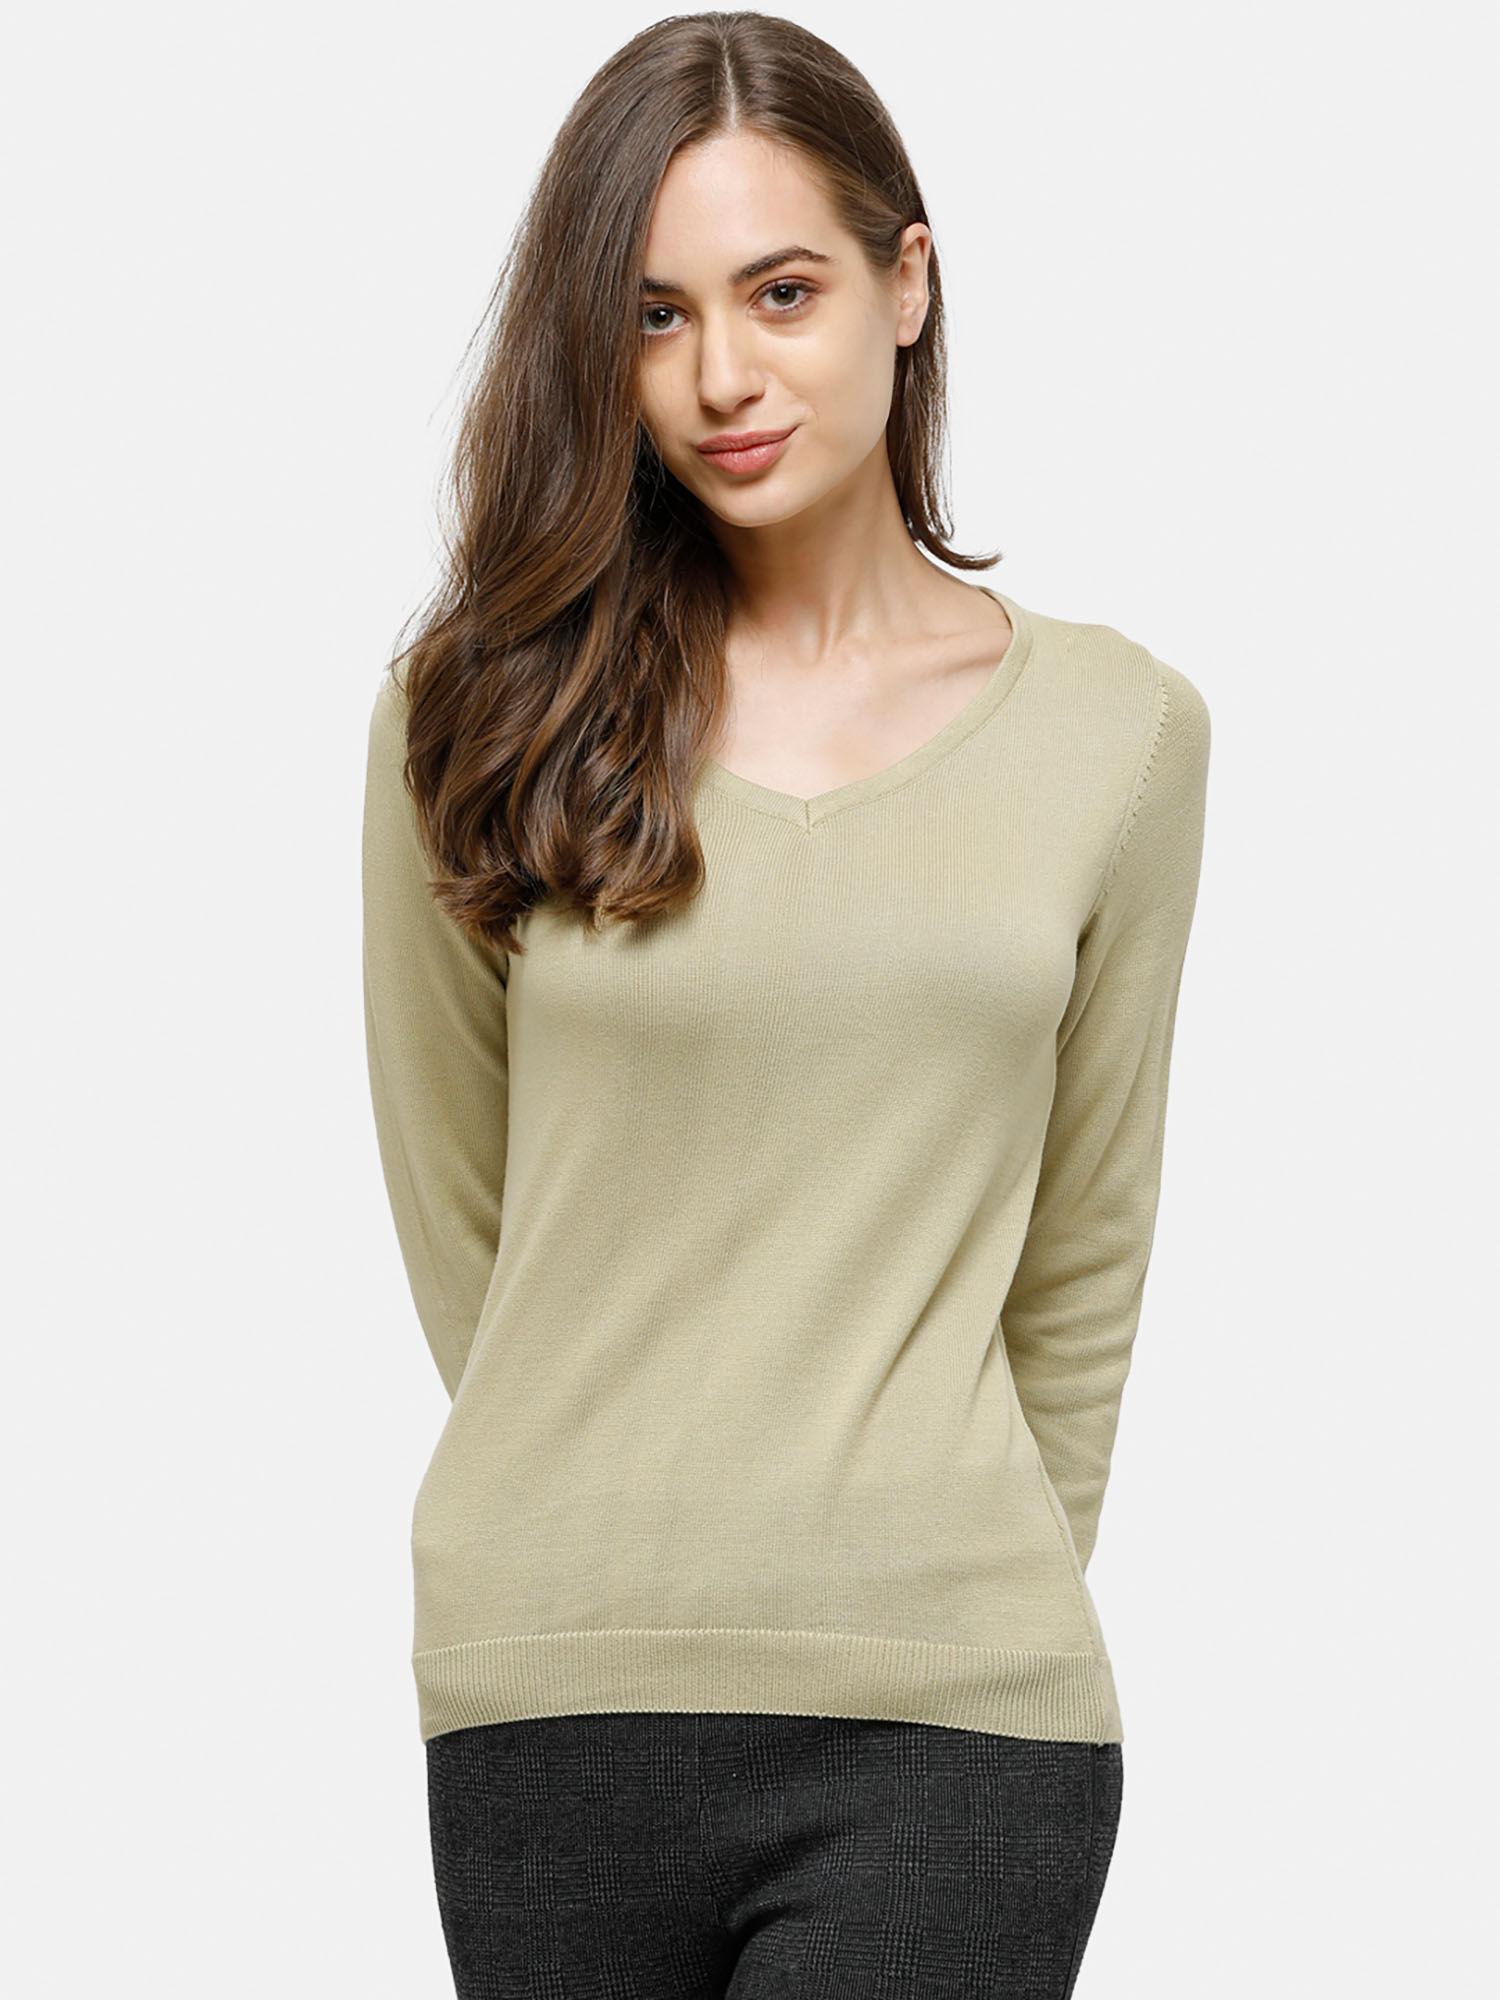 98 degree north's olive full sleeves sweater